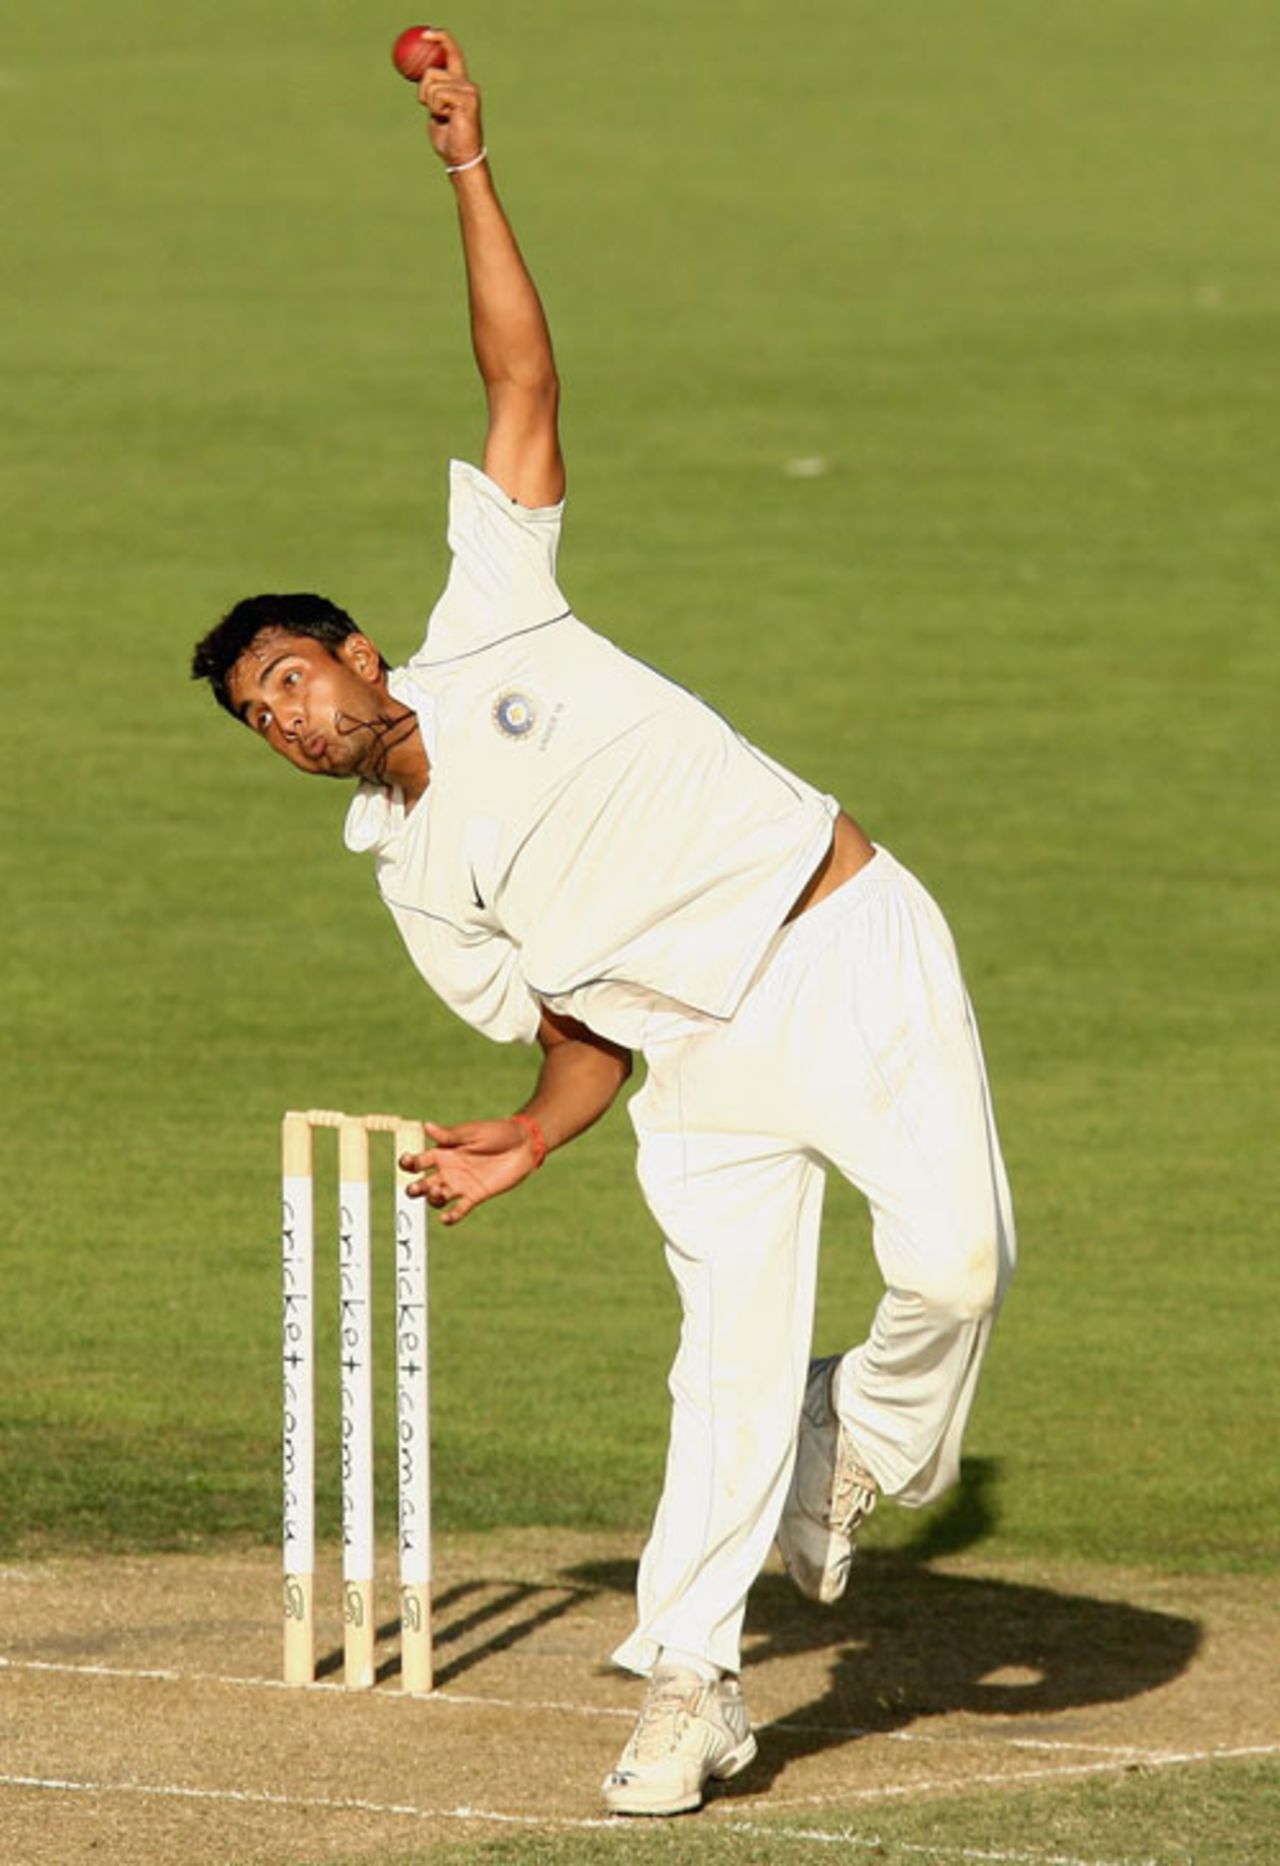 Gagandeep Singh in his delivery stride, Australia Under-19s v India Under-19s, 1st Test, 1st day, Hobart, April 11, 2009